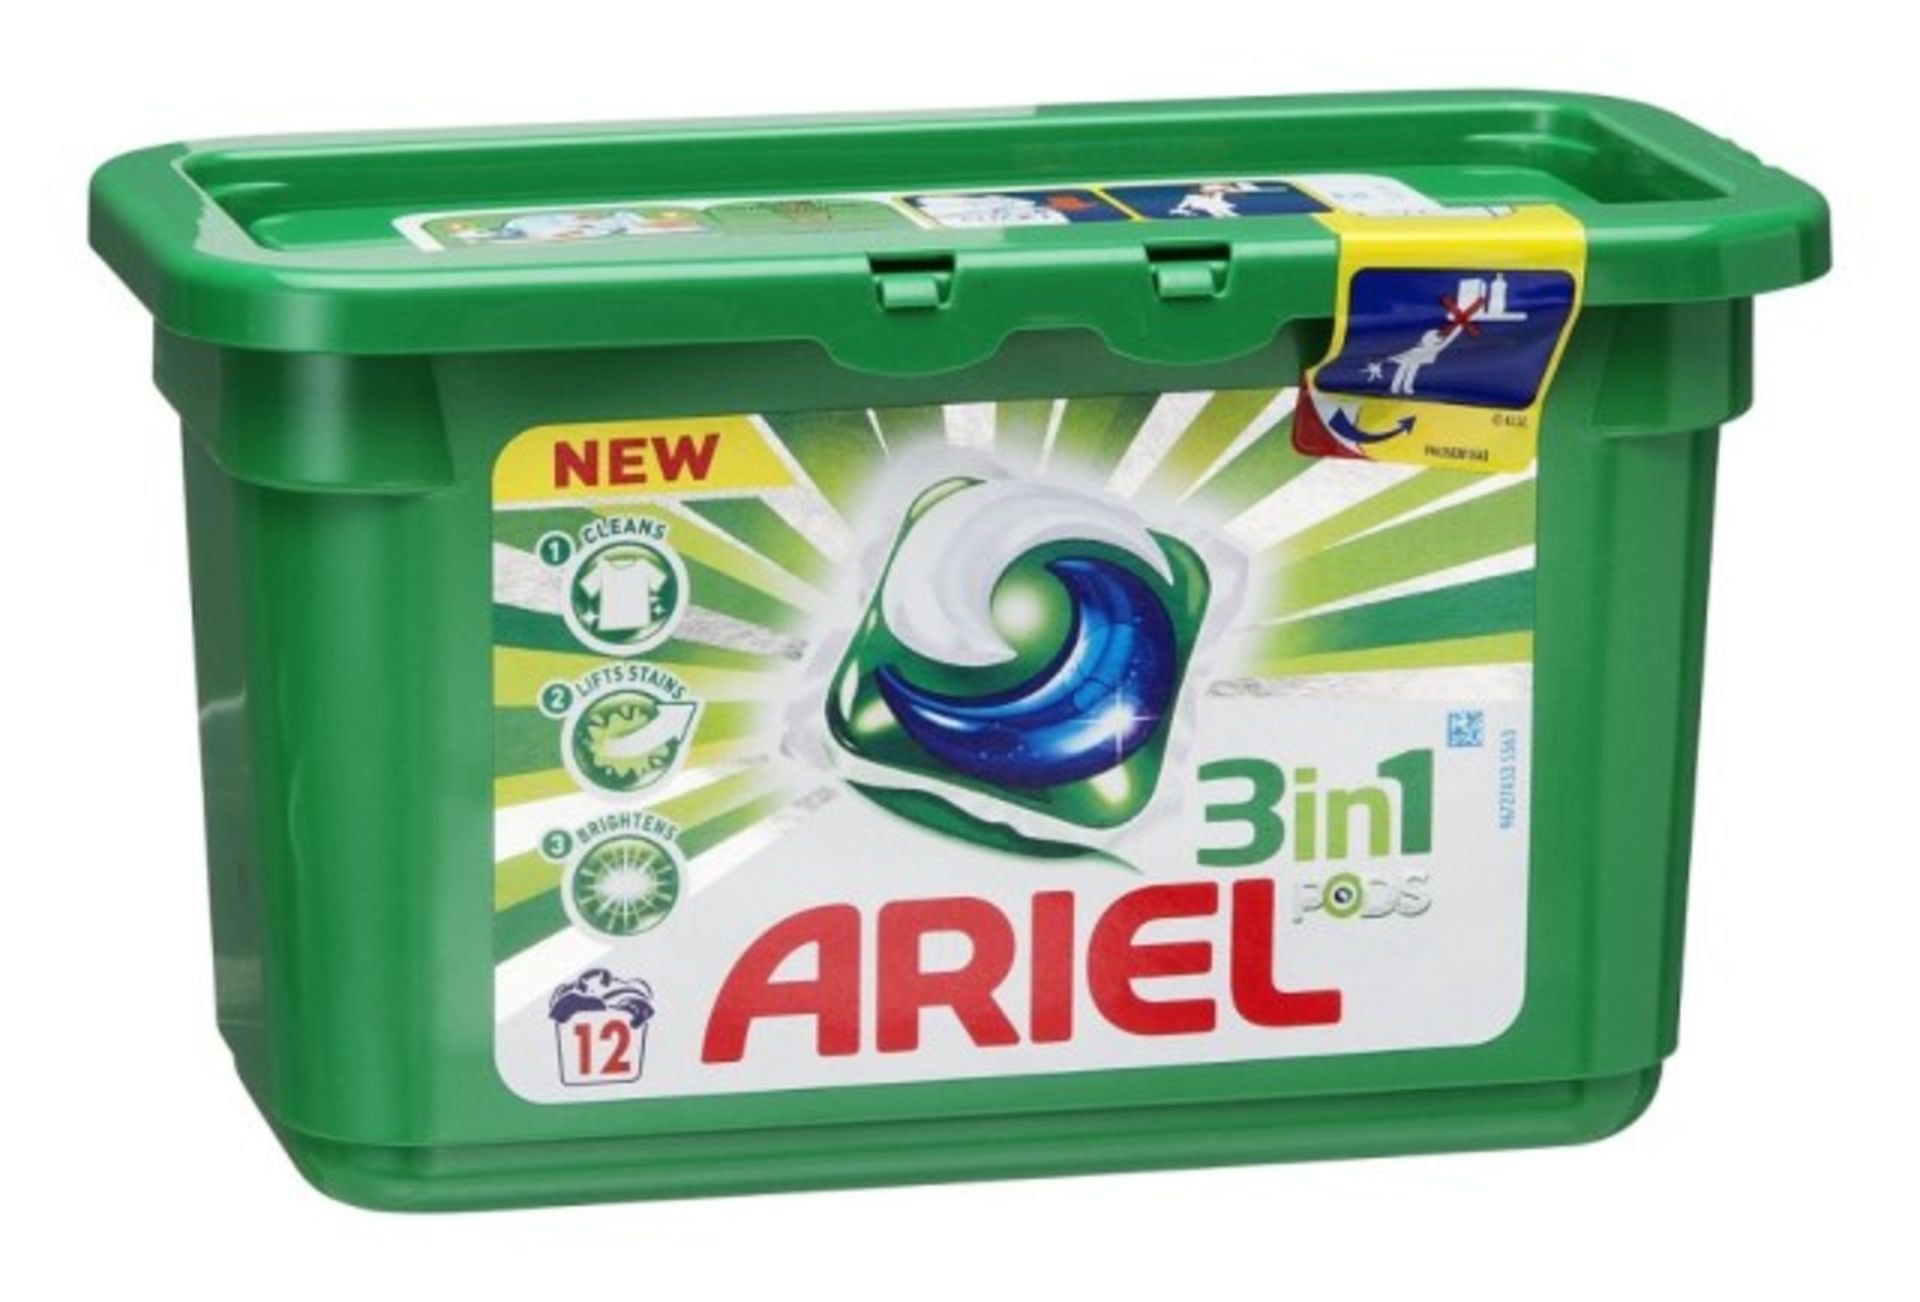 V *TRADE QTY* Brand New Ariel 3 in 1 Pods 12 Wash Pack RRP8.99 X 12 YOUR BID PRICE TO BE